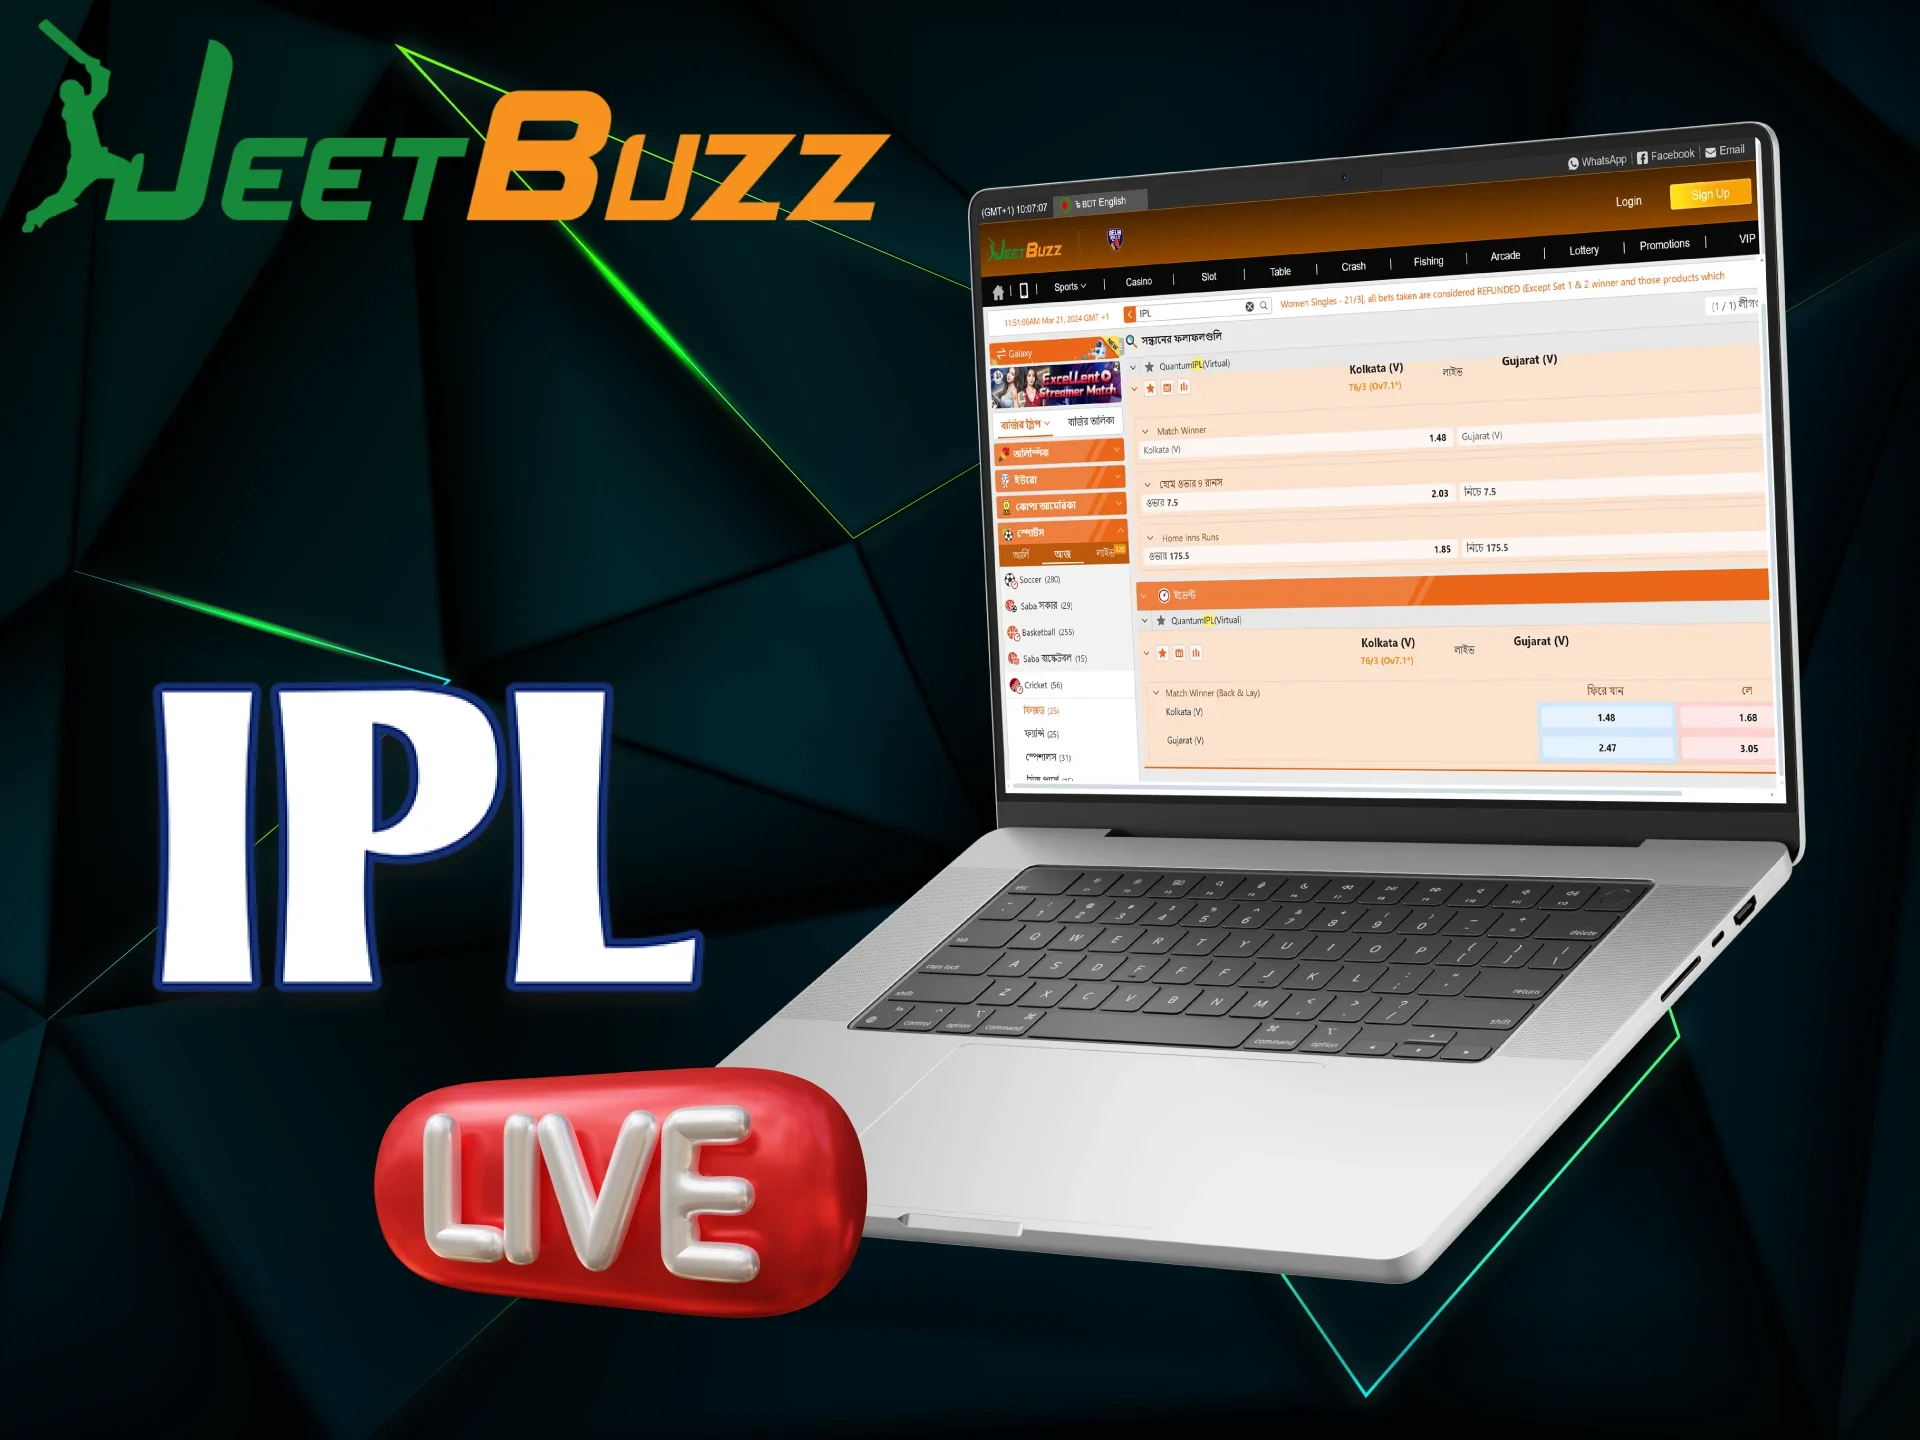 To bet on IPL Live at JeetBuzz create an account and make your first deposit.